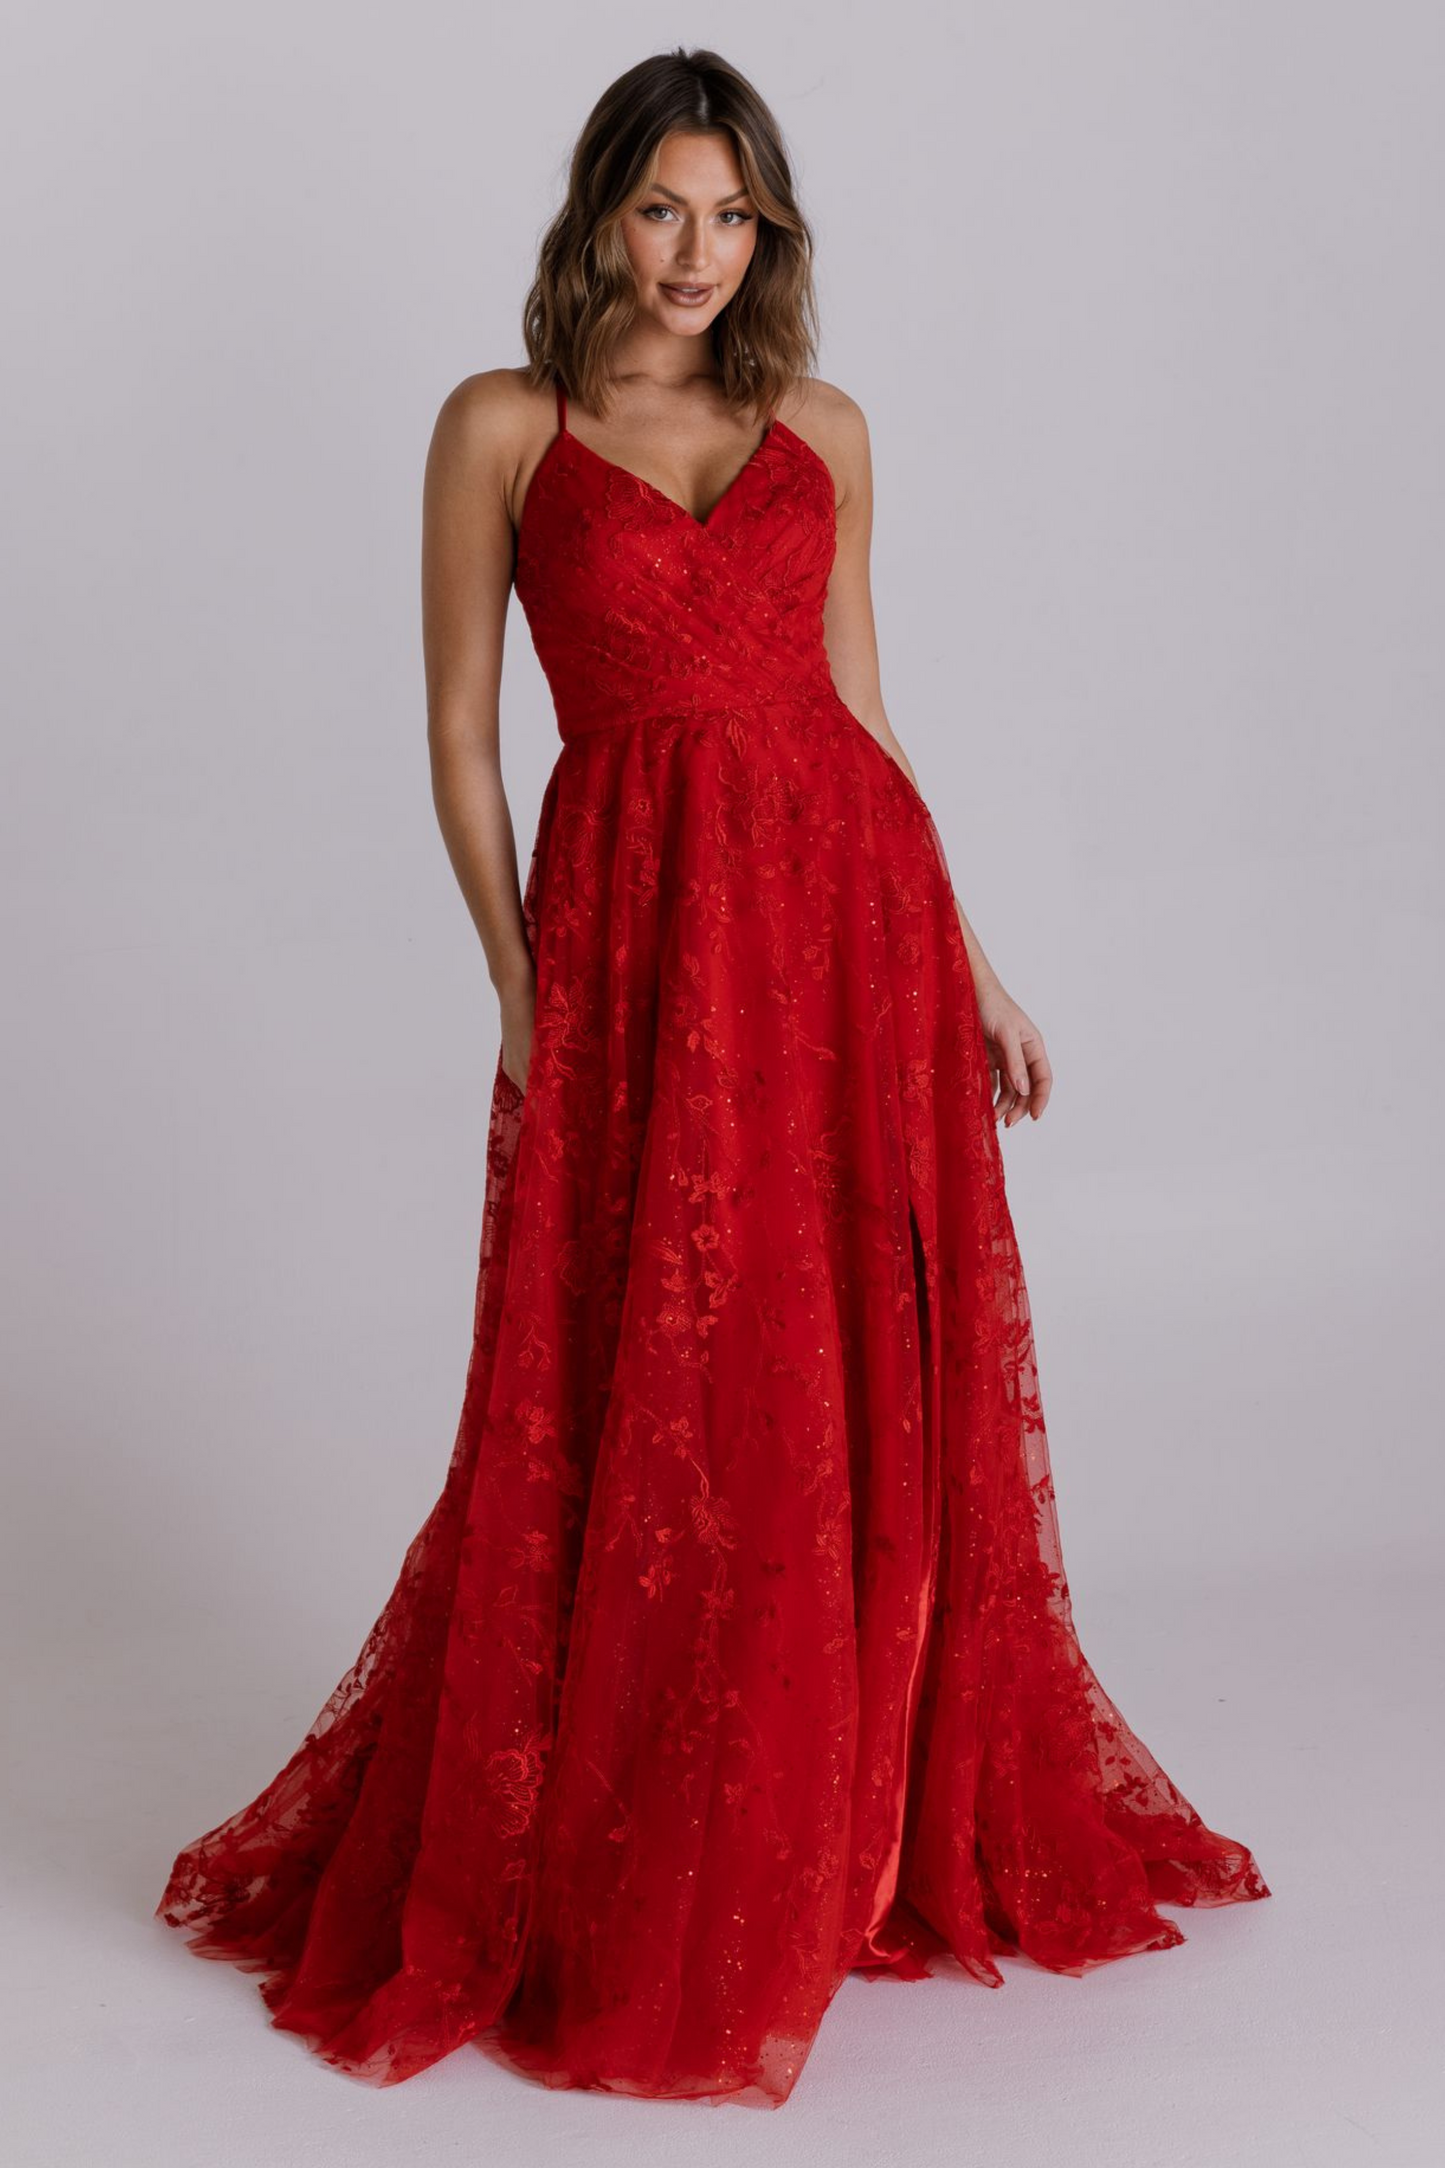 Tania Olsen A-line lace and glitter tulle formal dress in scarlet red